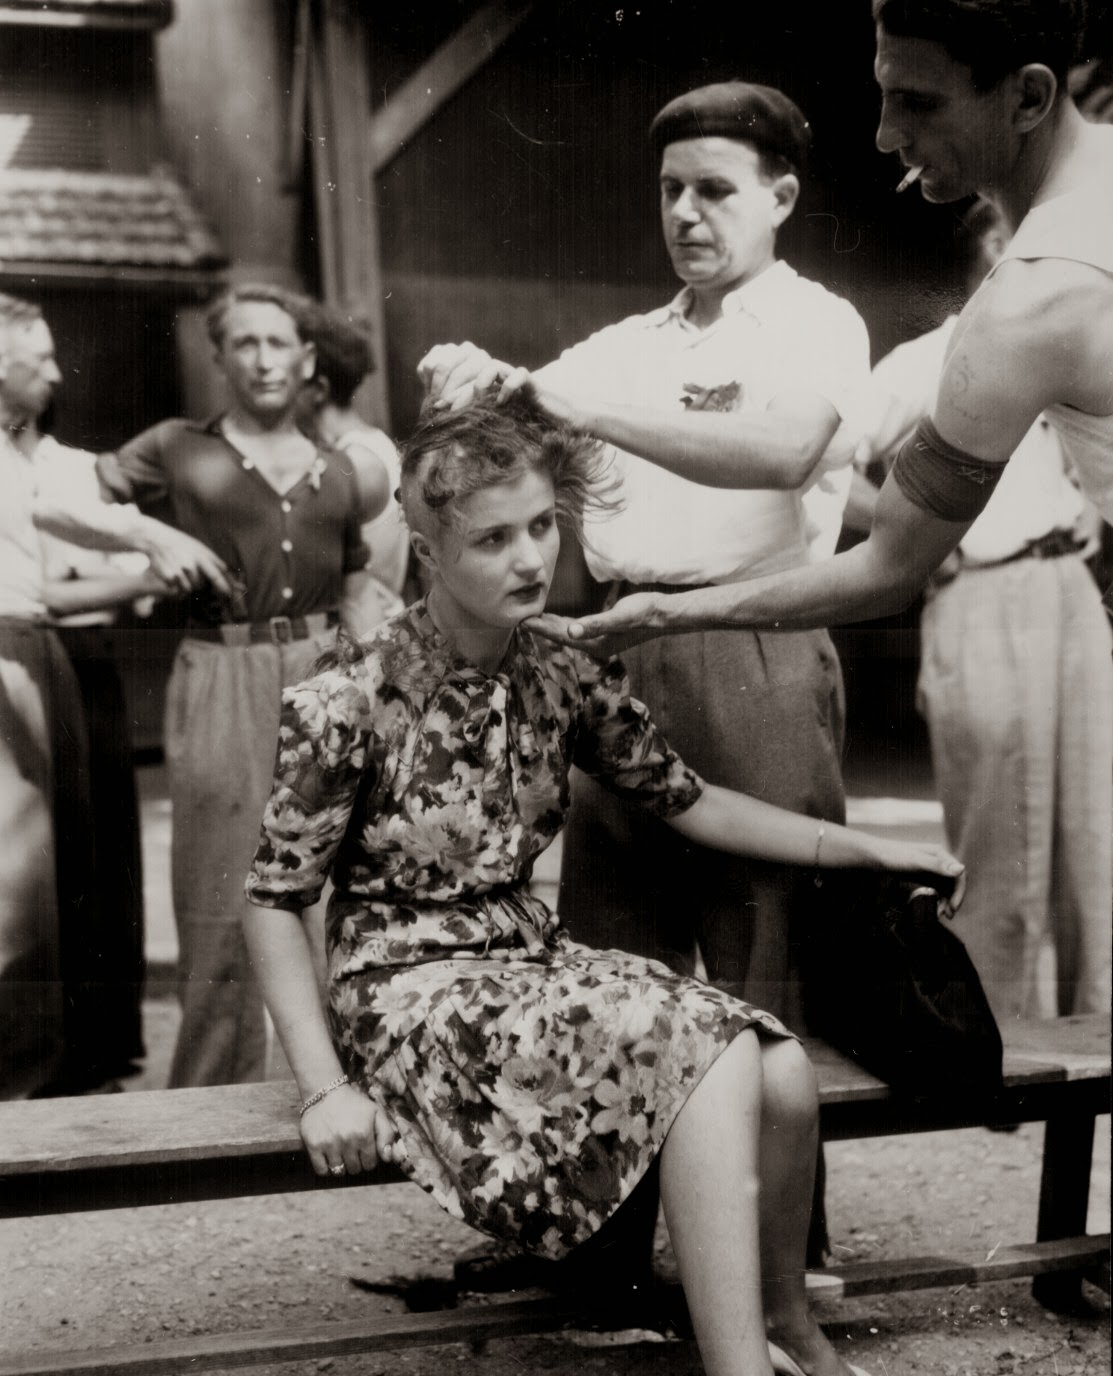 A+French+woman+has+her+head+shaved+by+civilians+as+a+penalty+for+having+consorted+with+German+troops,+1944.jpg